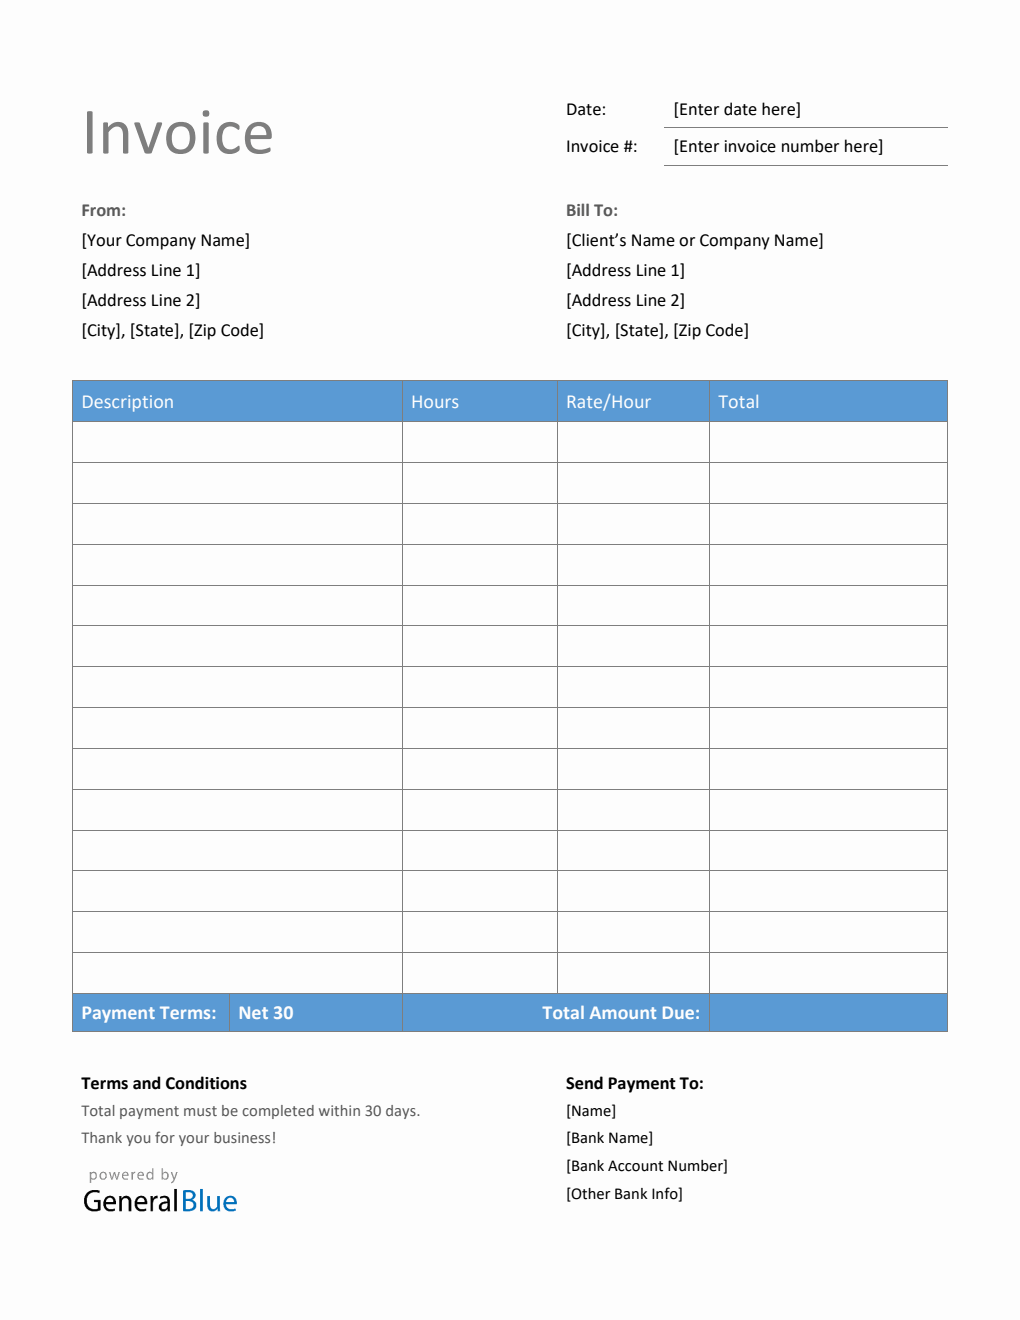 Invoice Template for U.S. Freelancers in Word (Blue) Throughout Invoice Template Usa